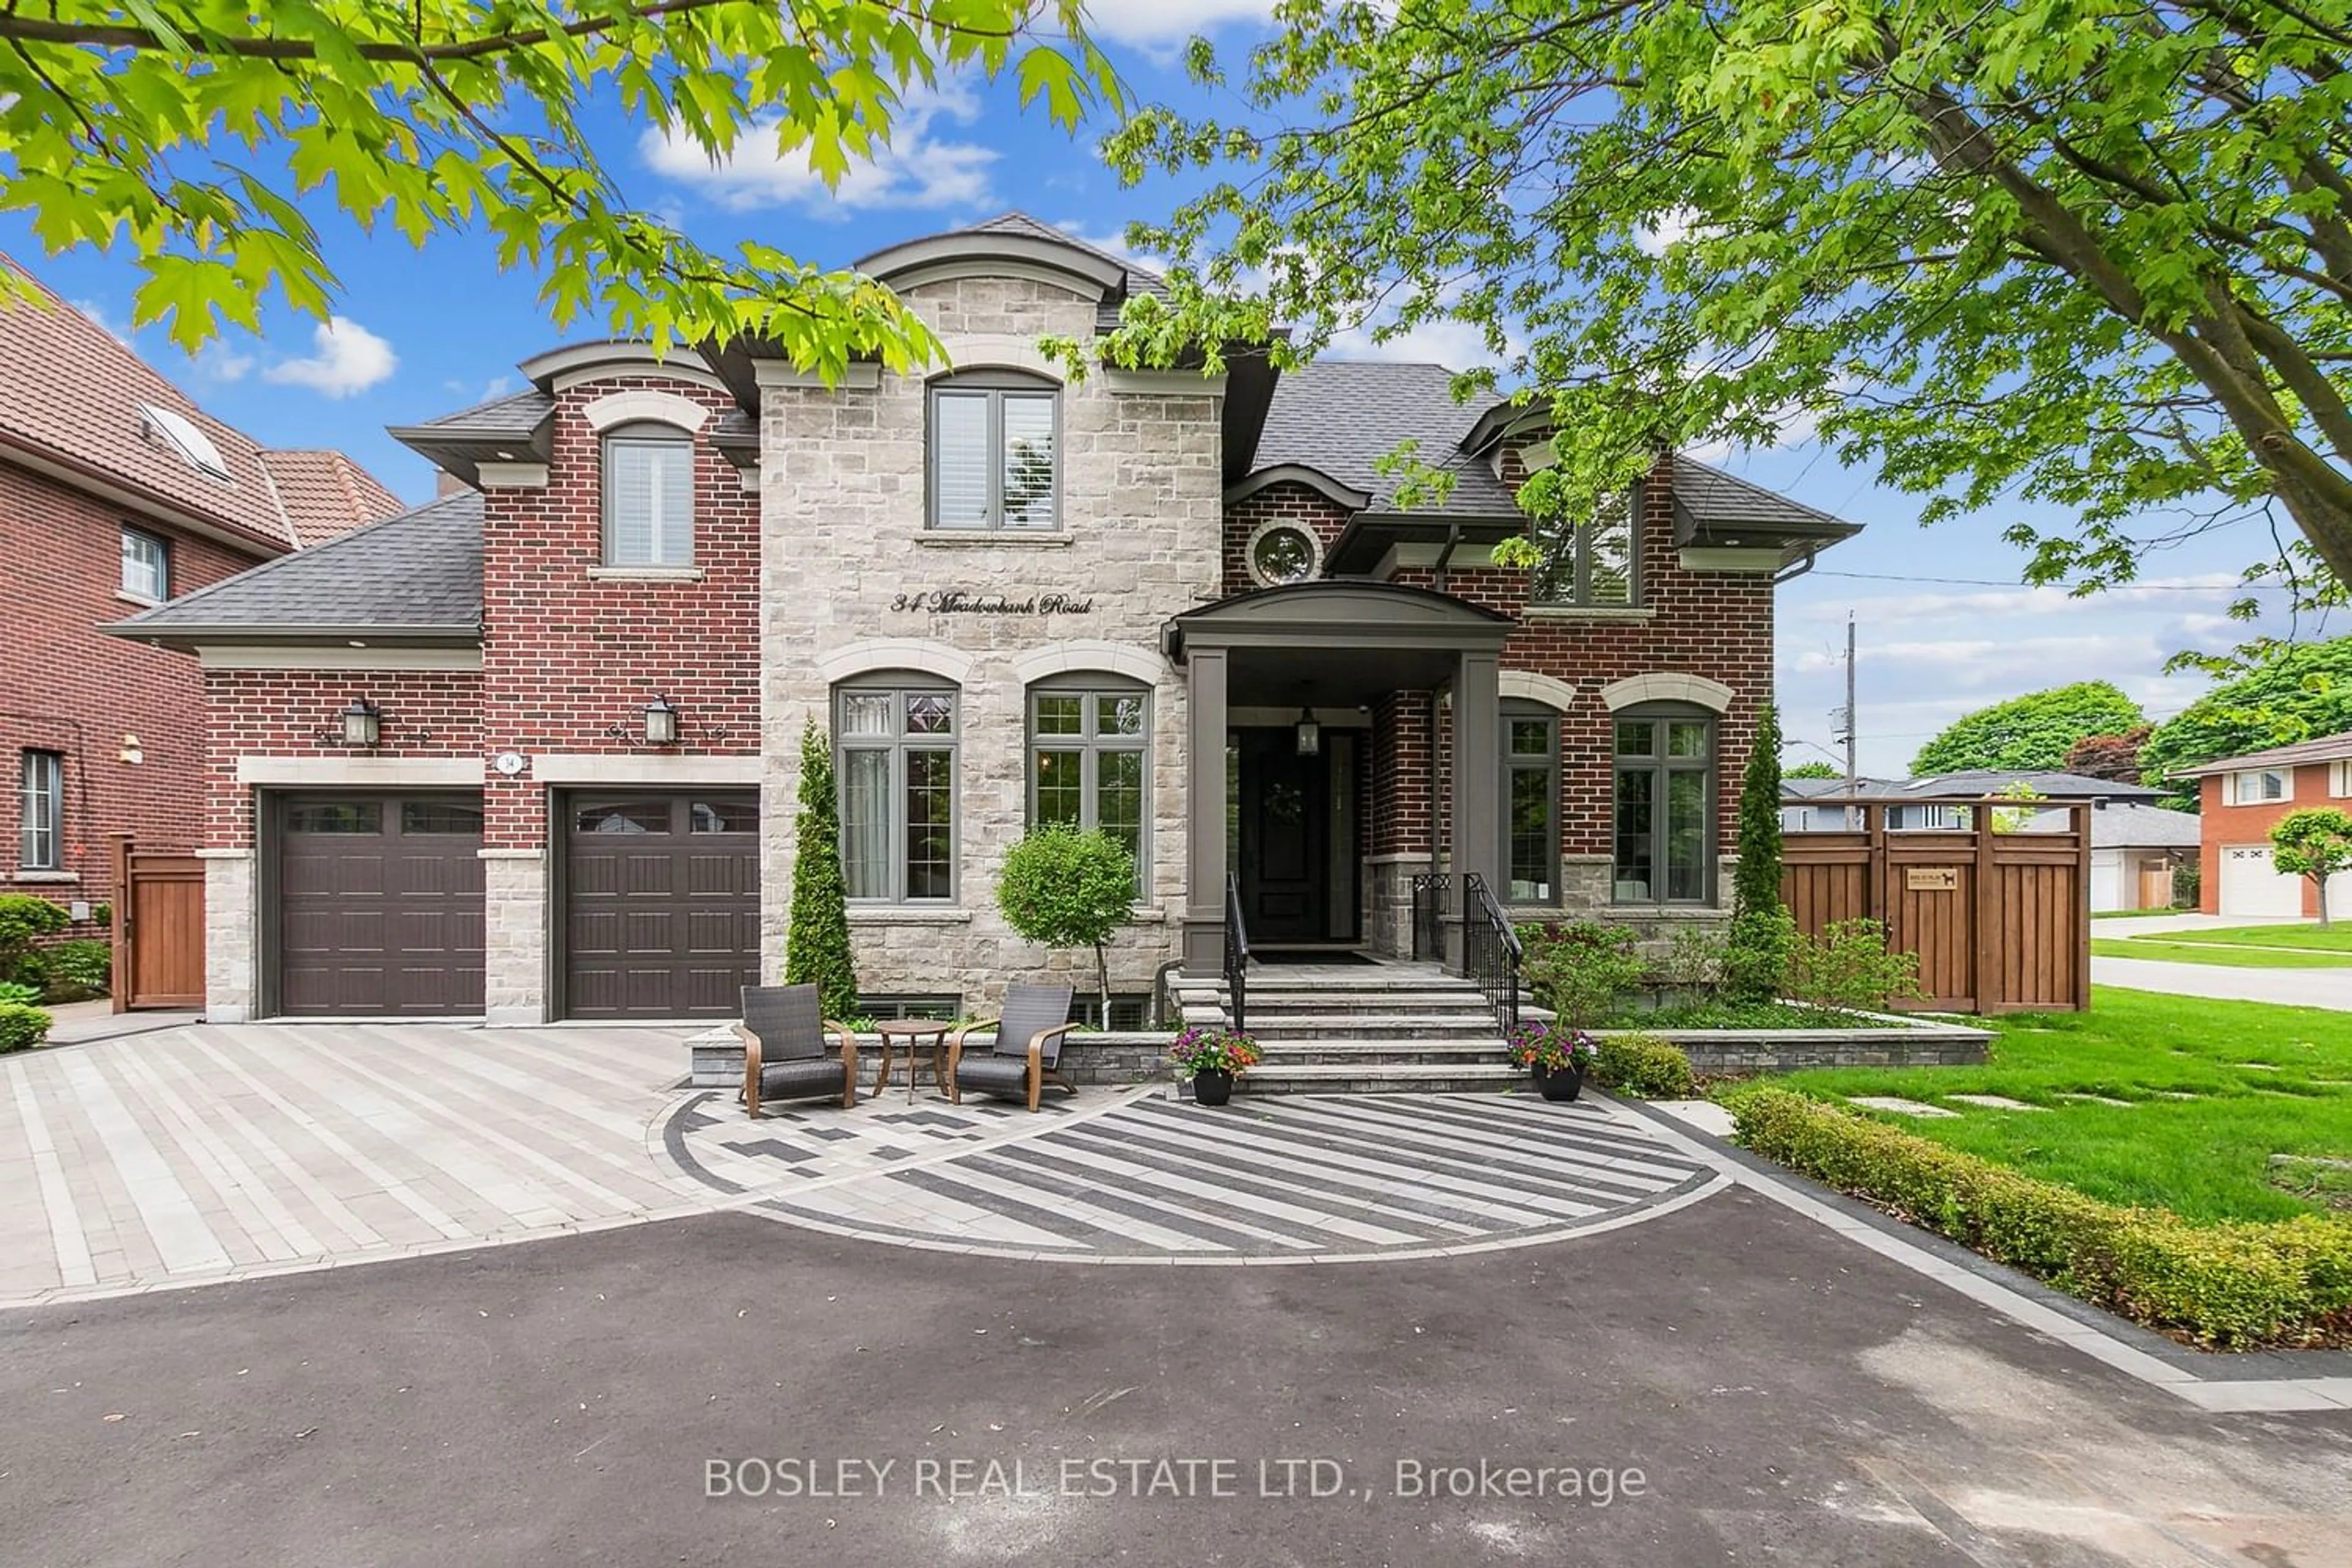 Home with brick exterior material for 34 Meadowbank Rd, Toronto Ontario M9B 5C5